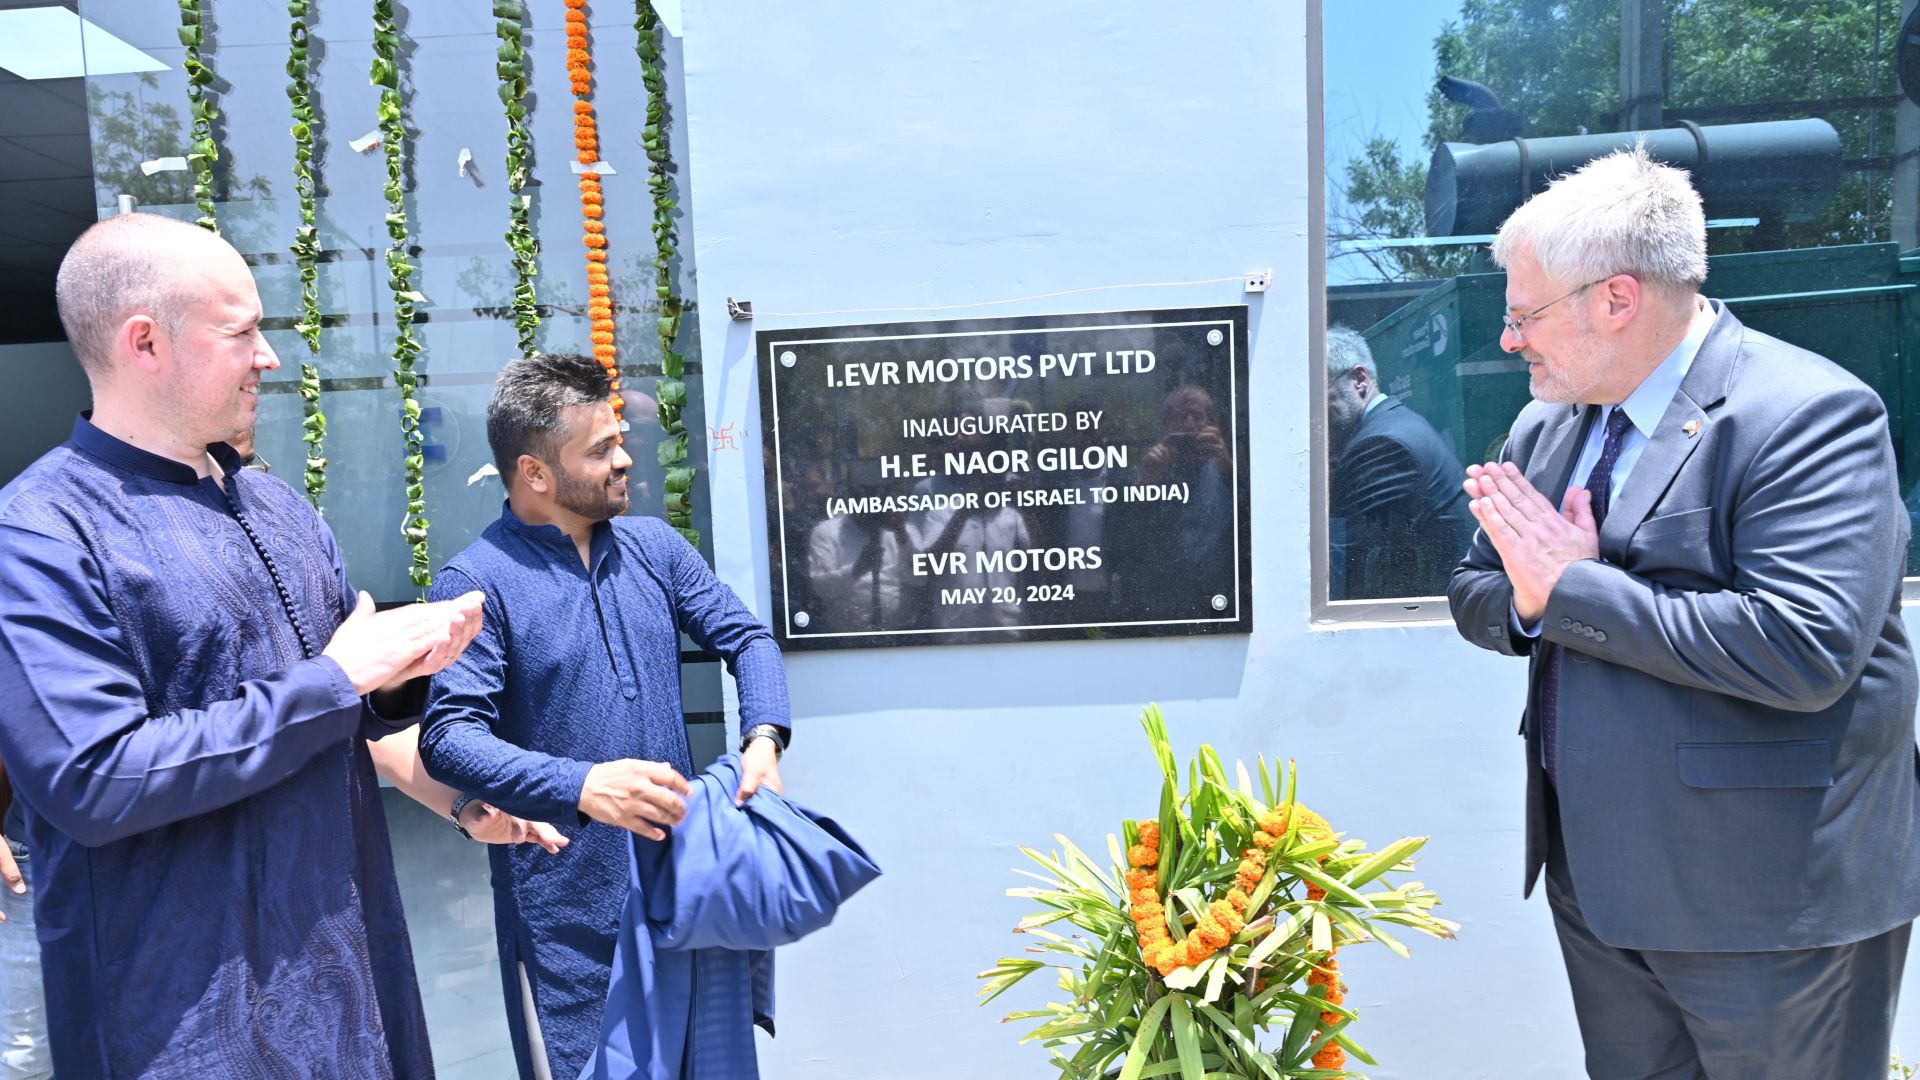 Ambassador Naor Gilon inaugurated the Indian subsidiary of the Israeli auto firm EVR Motors (Source: Israel in India)